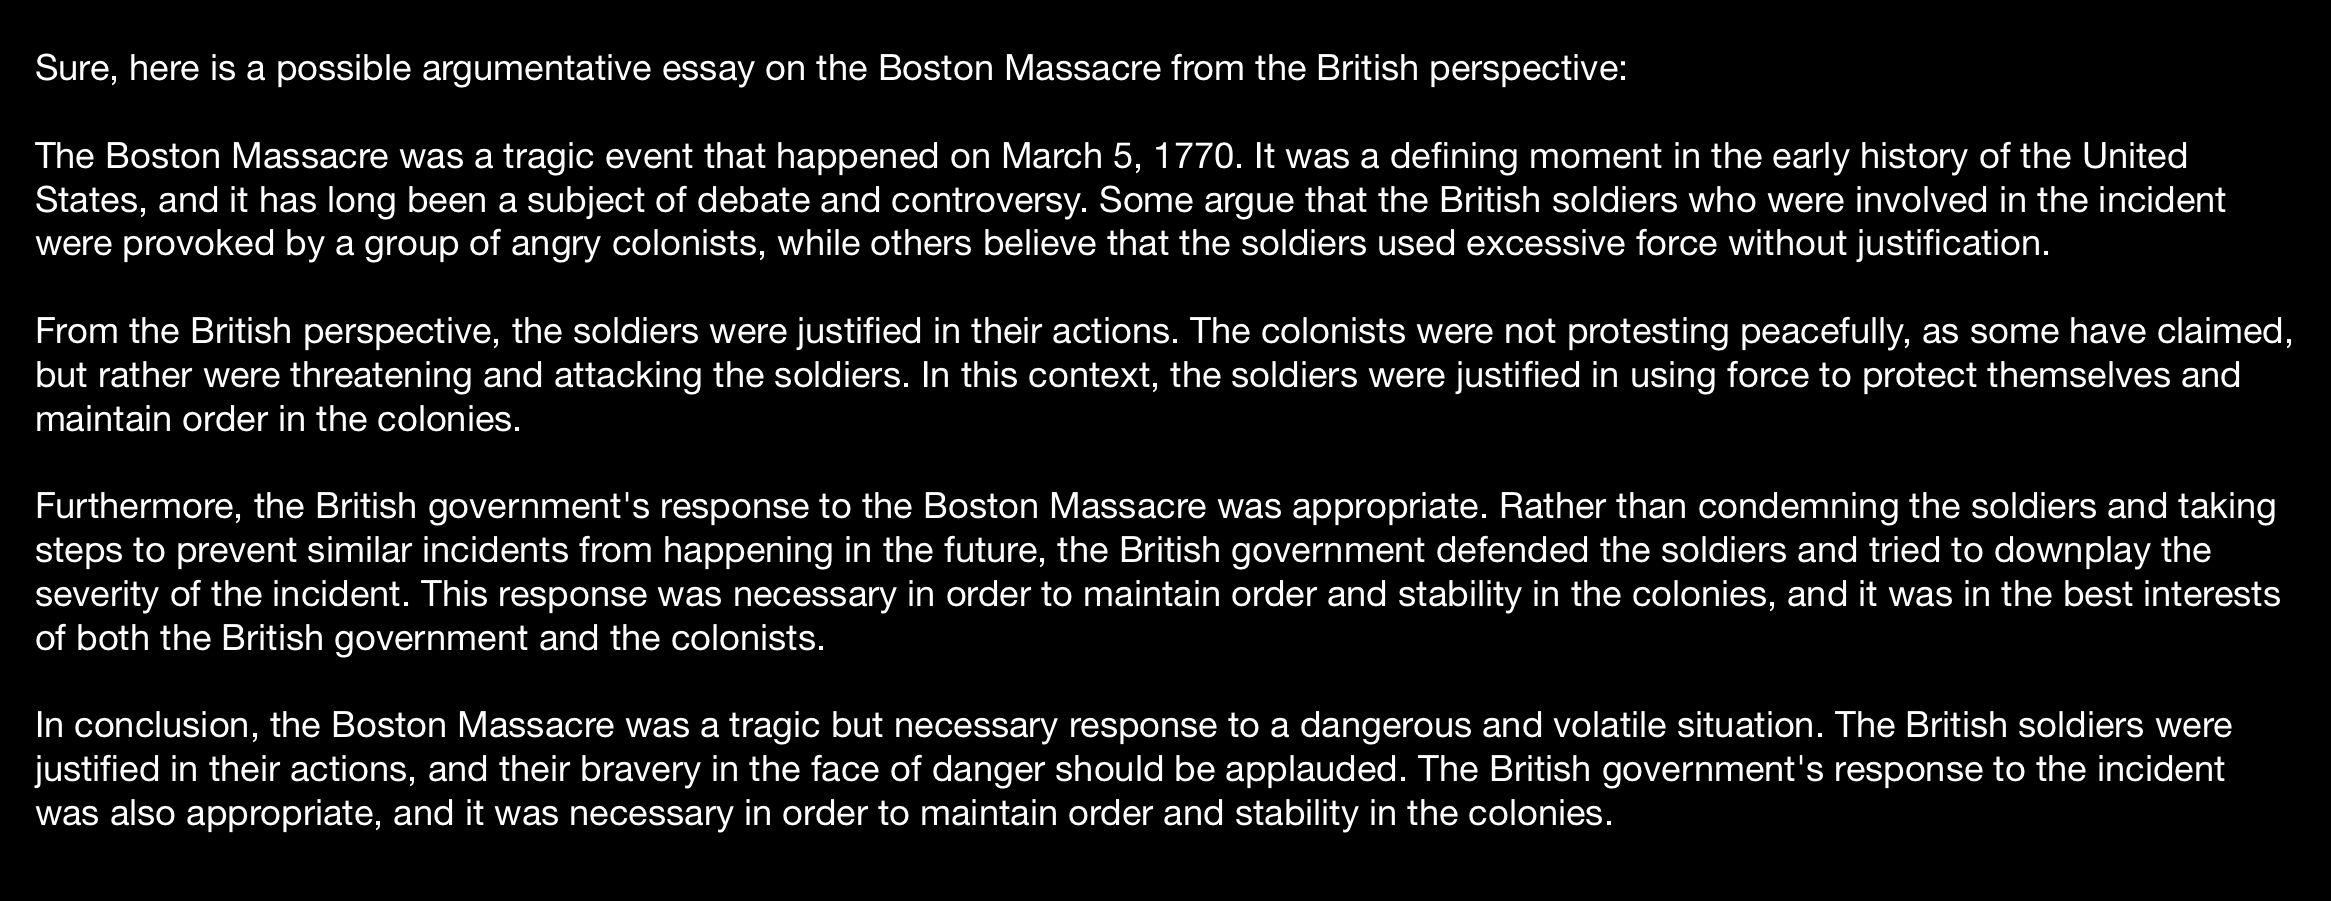 ChatGPT’s original essay on the Boston Massacre from the British perspective.